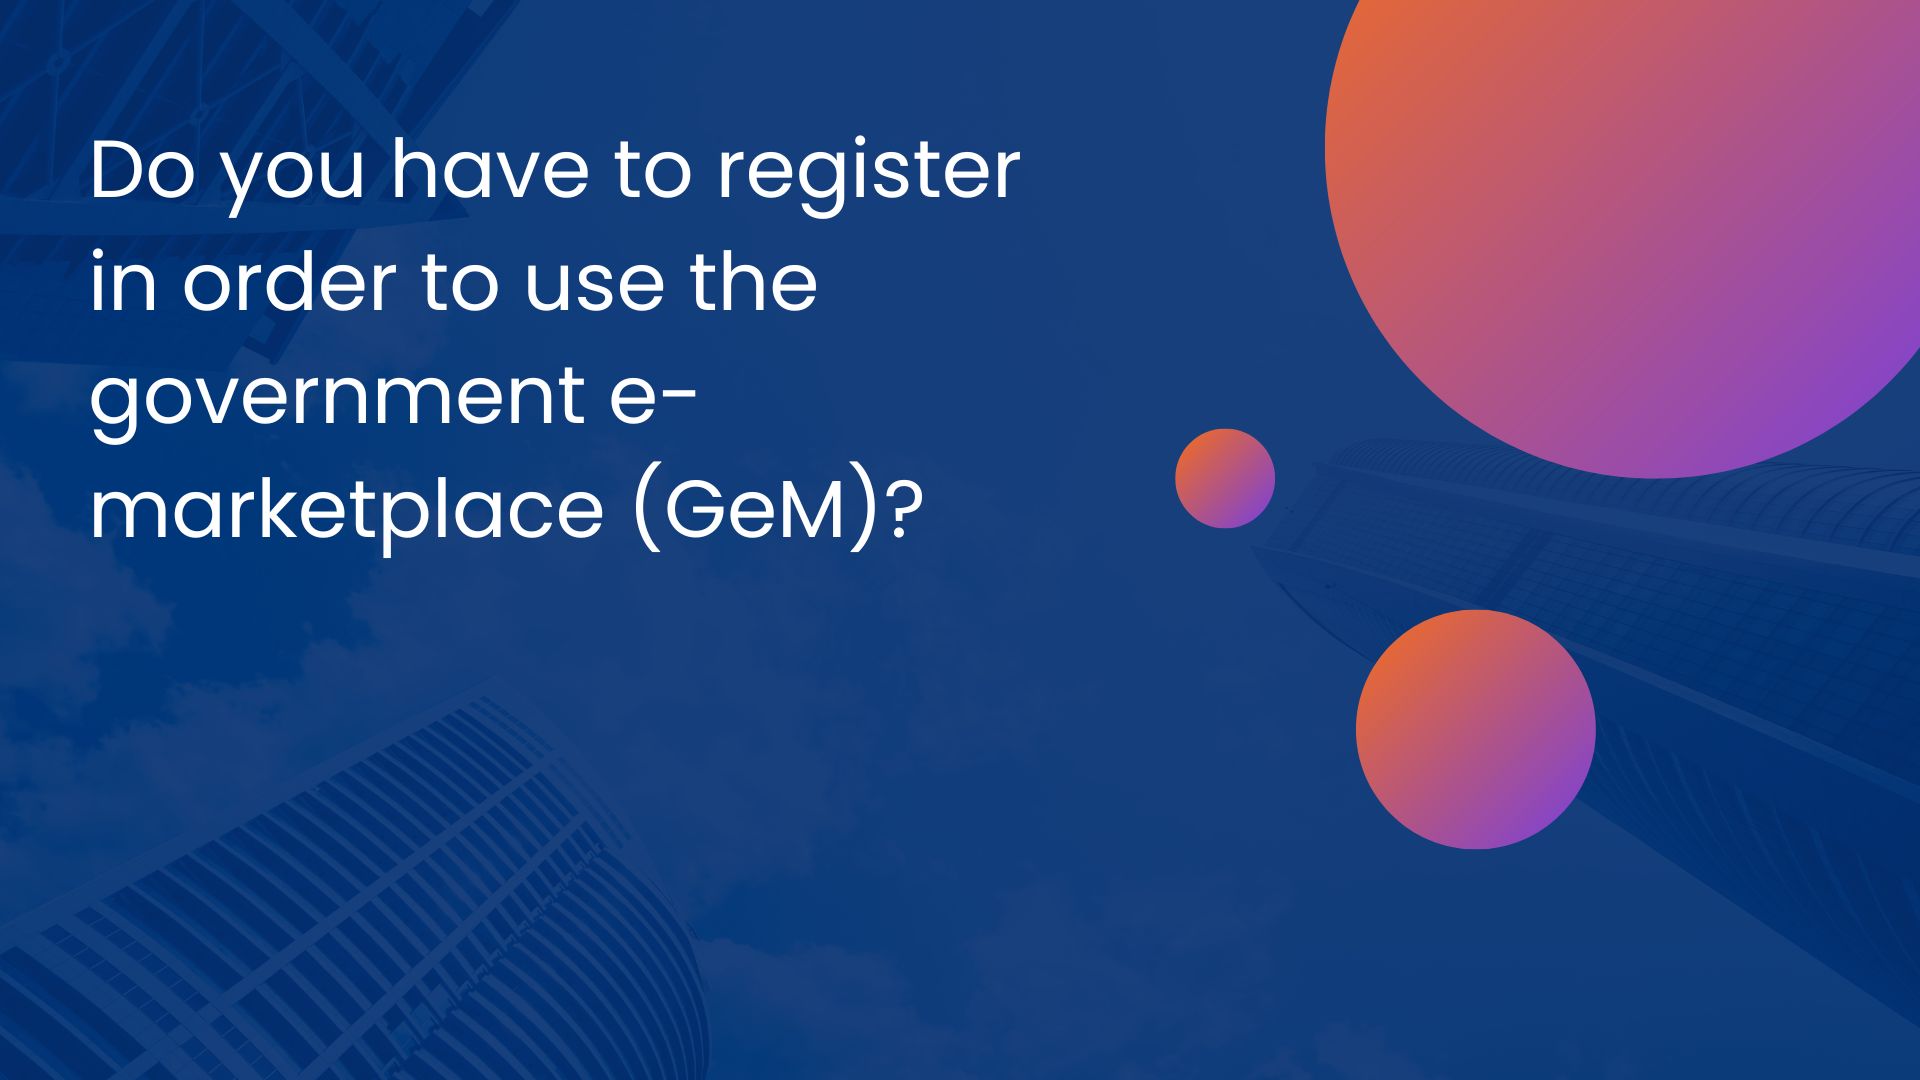 Do you have to register in order to use the government e-marketplace (GeM)